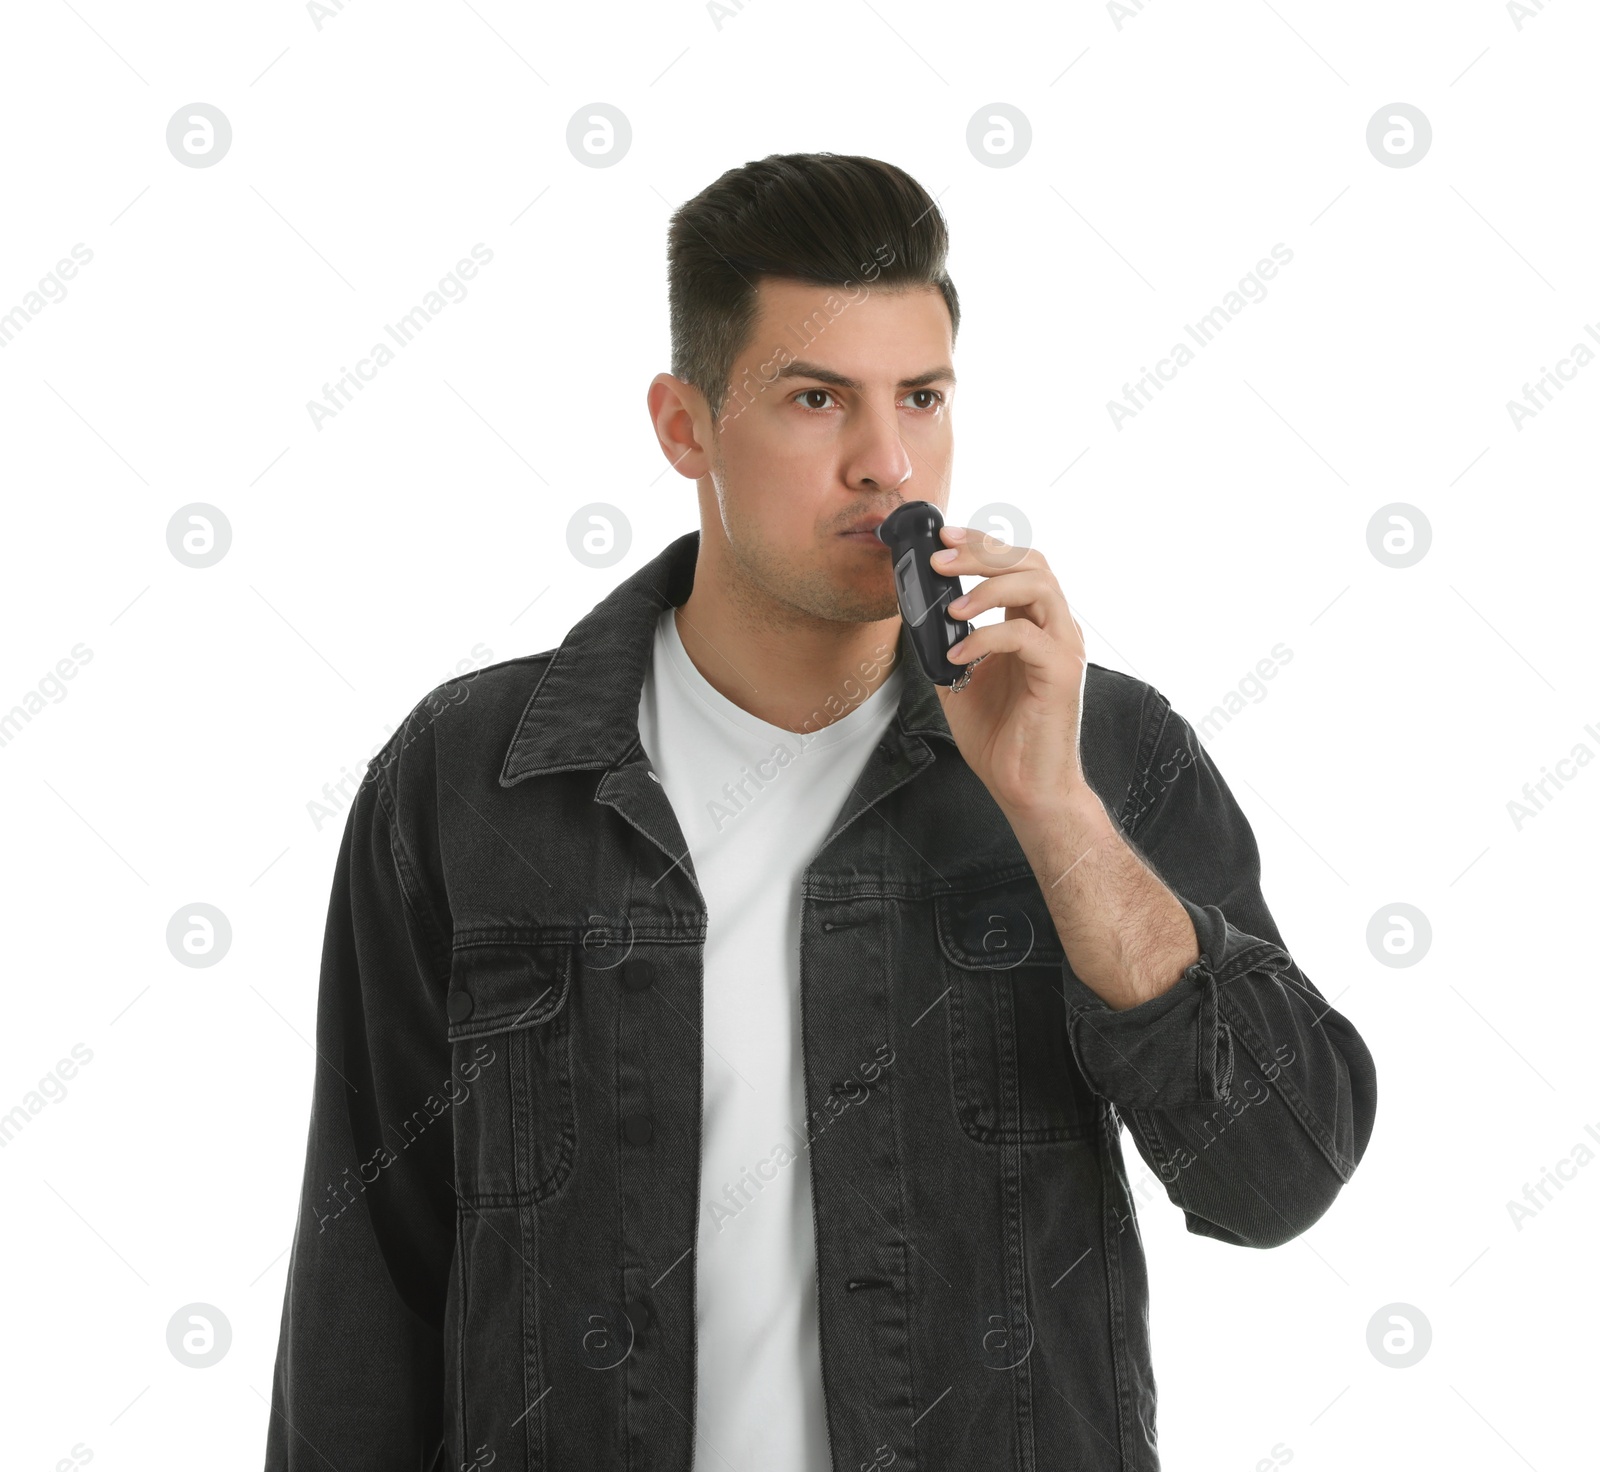 Photo of Man blowing into breathalyzer on white background